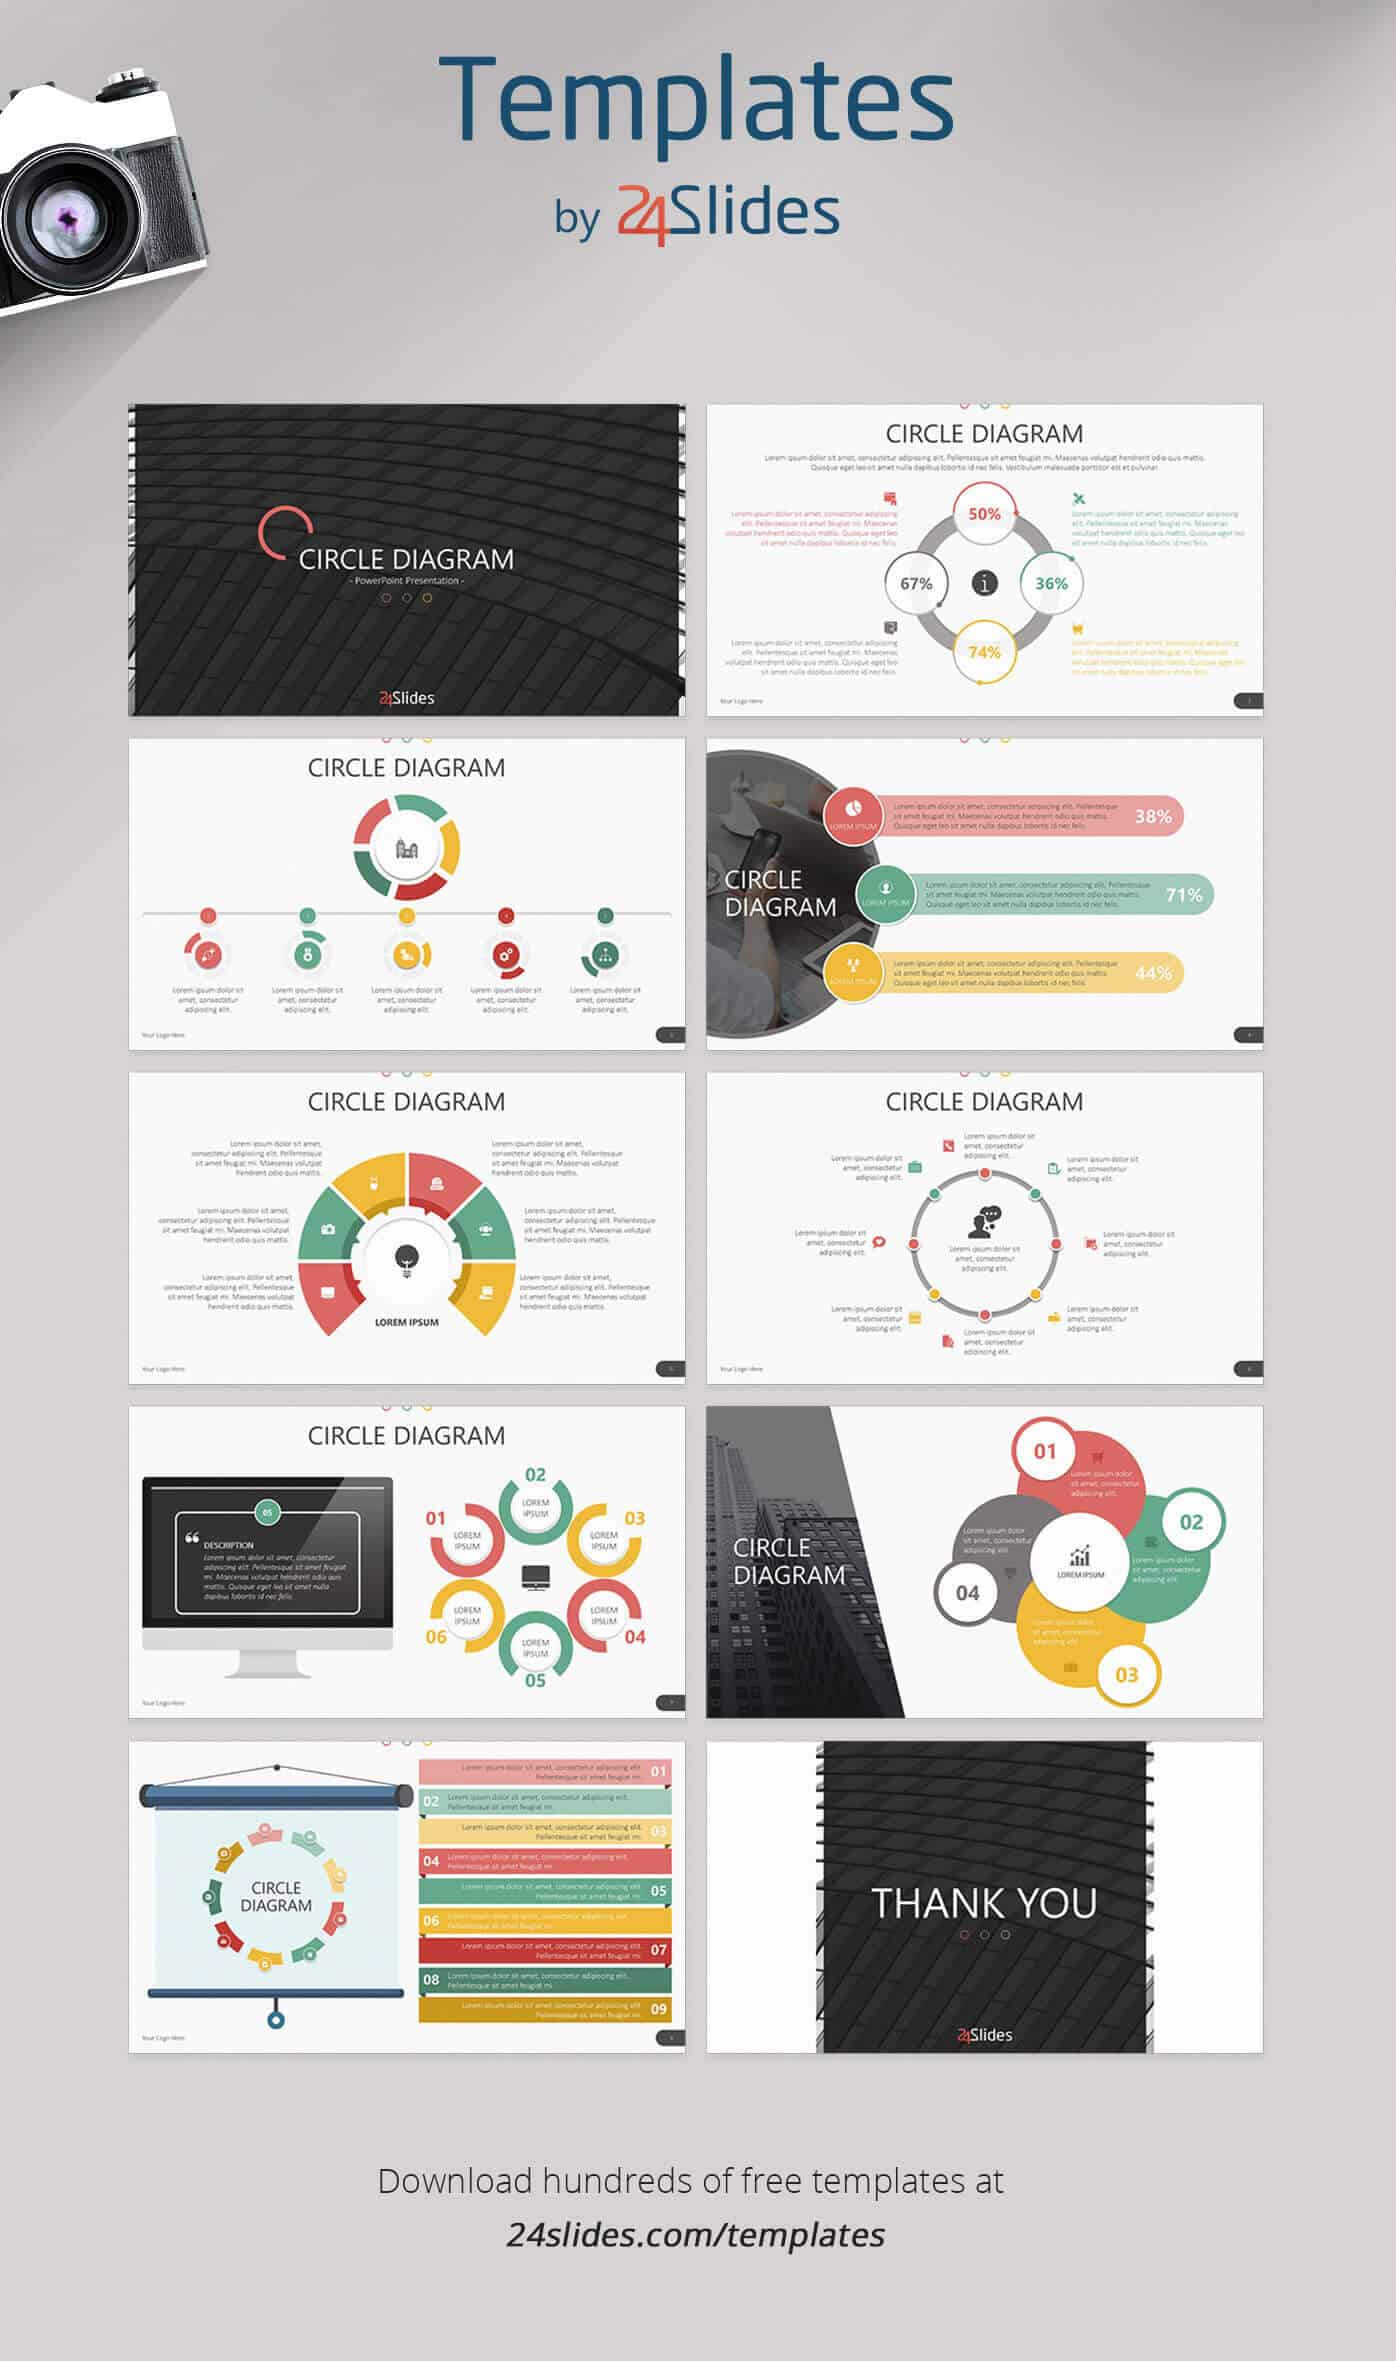 15 Fun And Colorful Free Powerpoint Templates | Present Better Inside Free Powerpoint Presentation Templates Downloads